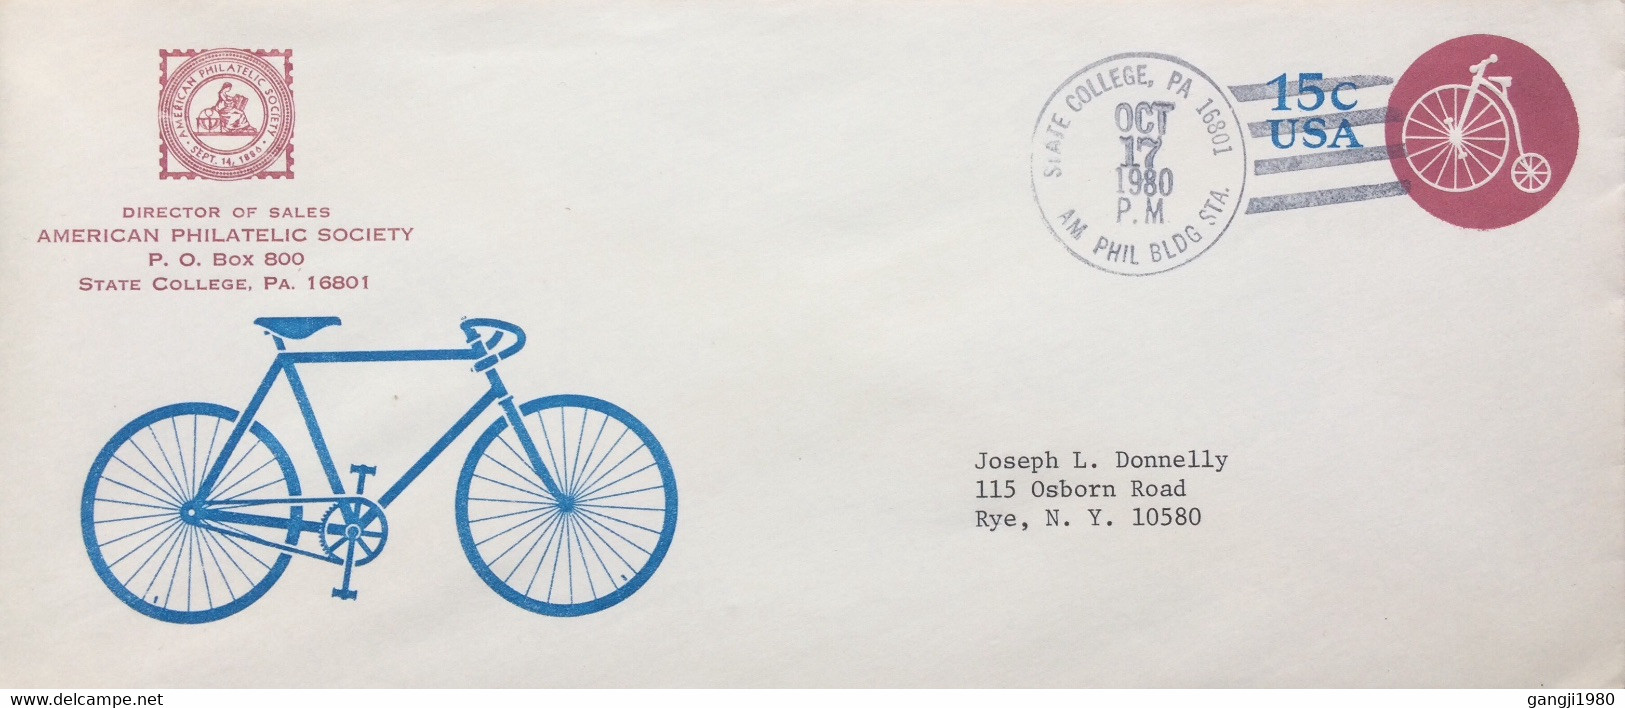 USA 1980, STATIONERY, ILLUSTRATE COVER USED,  “CYCLE” STATE COLLEGE CANCEL,AMERICAN PHILATELIC SOCIETY, - Briefe U. Dokumente